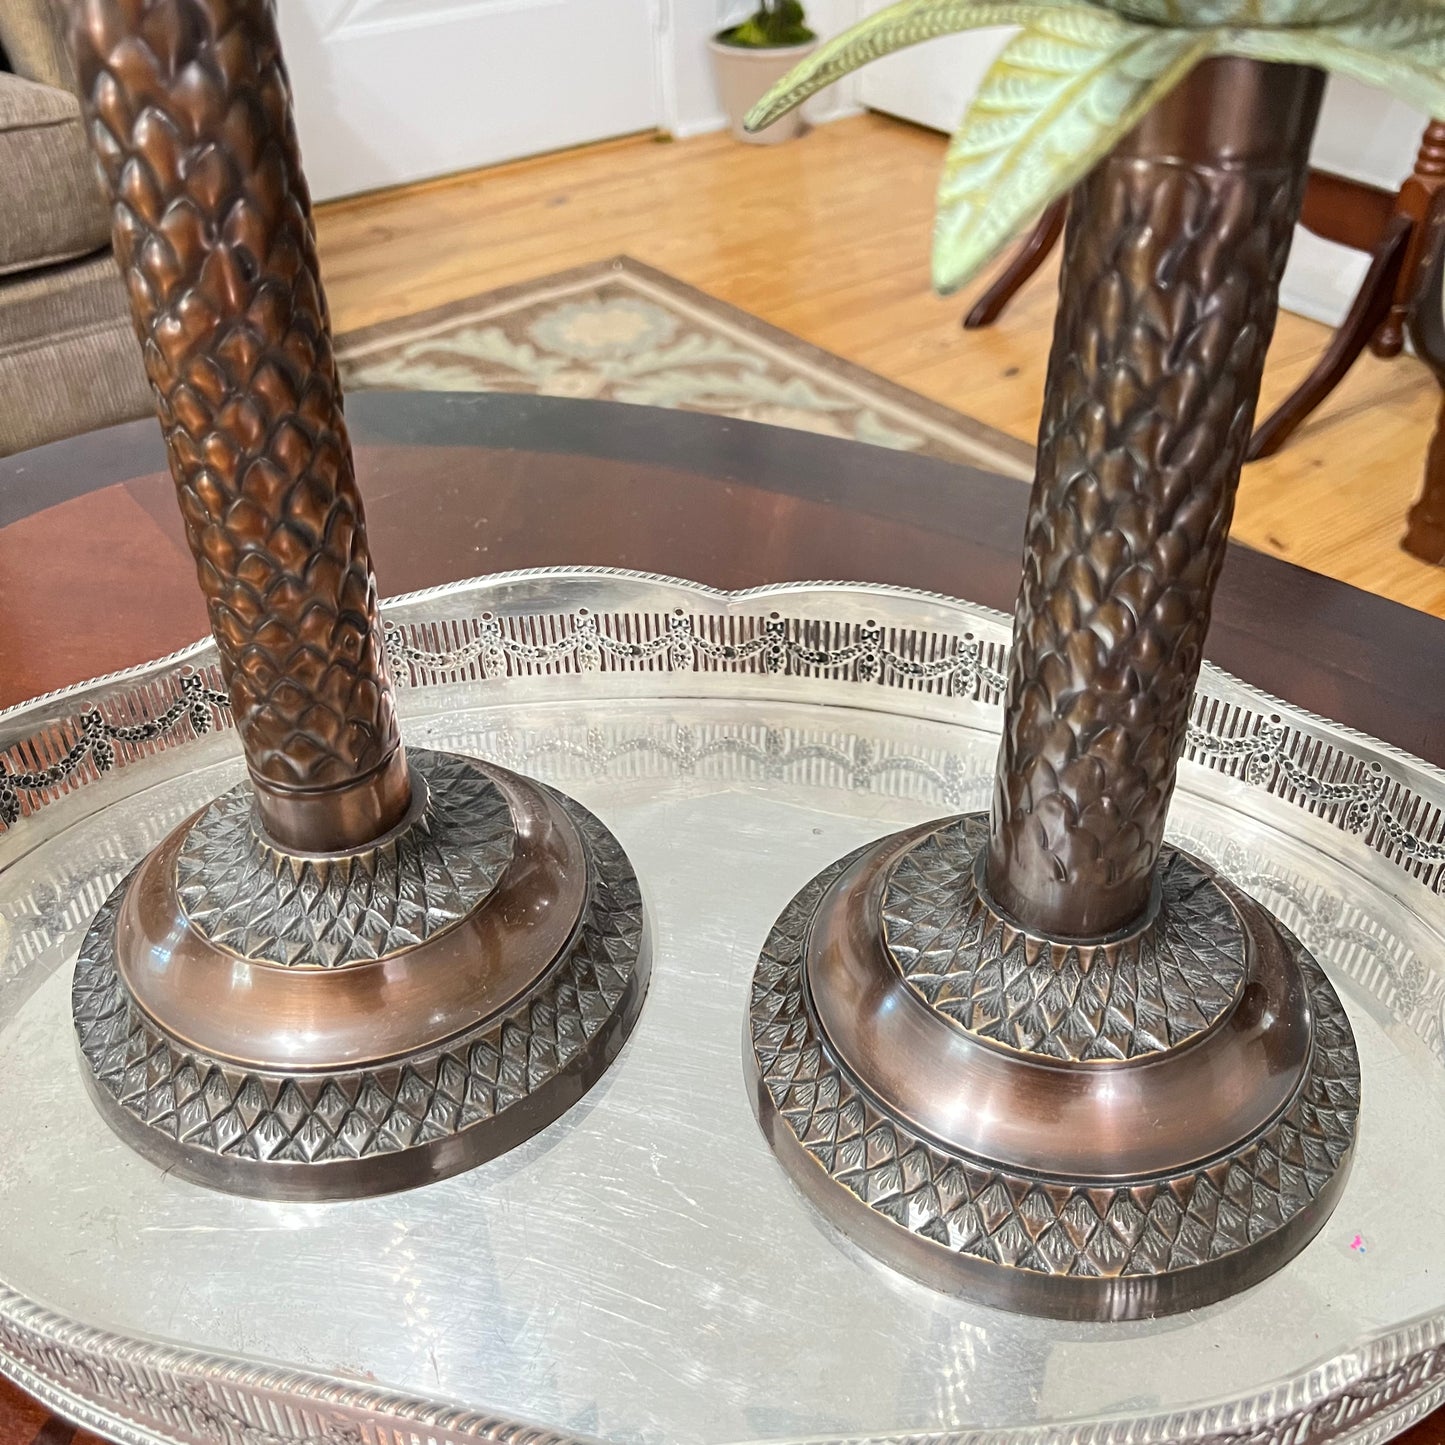 Brass Pineapple Palm Taper Candleholders W/ Etched Glass Hurricane Shade - Pair